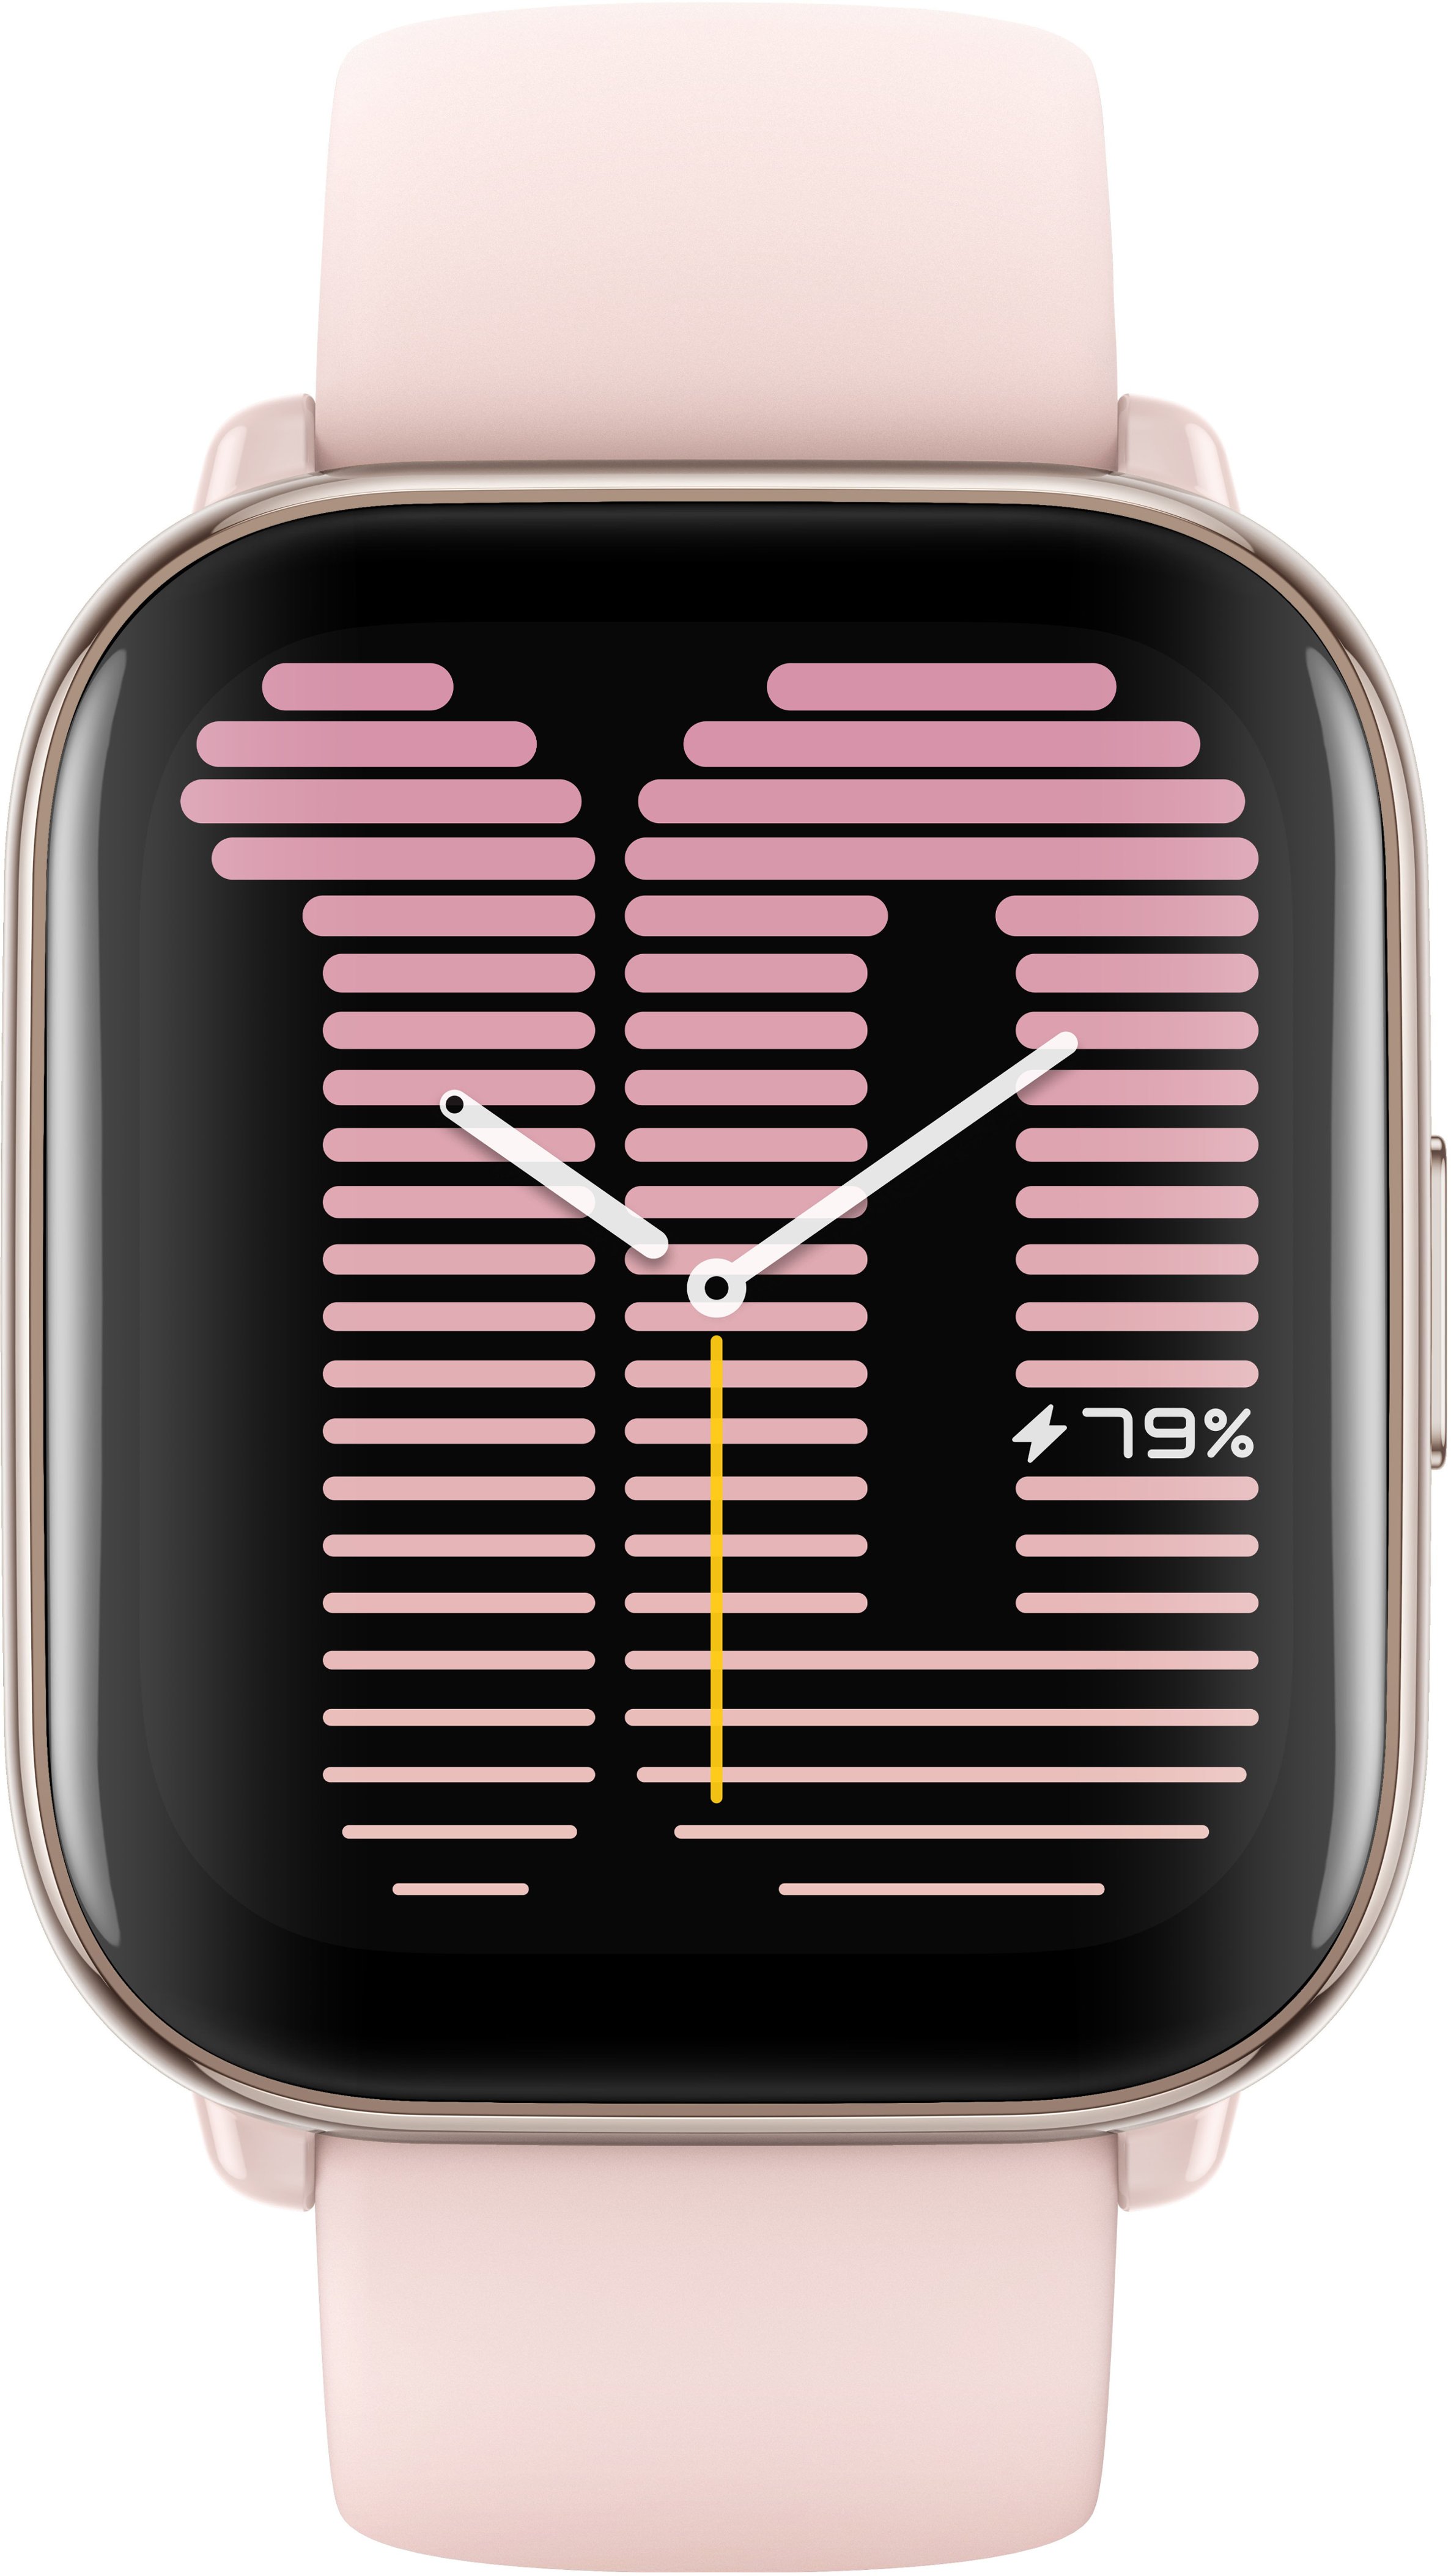 Angle View: Amazfit - Active Smartwatch 35.9mm Aluminum Alloy - Pink